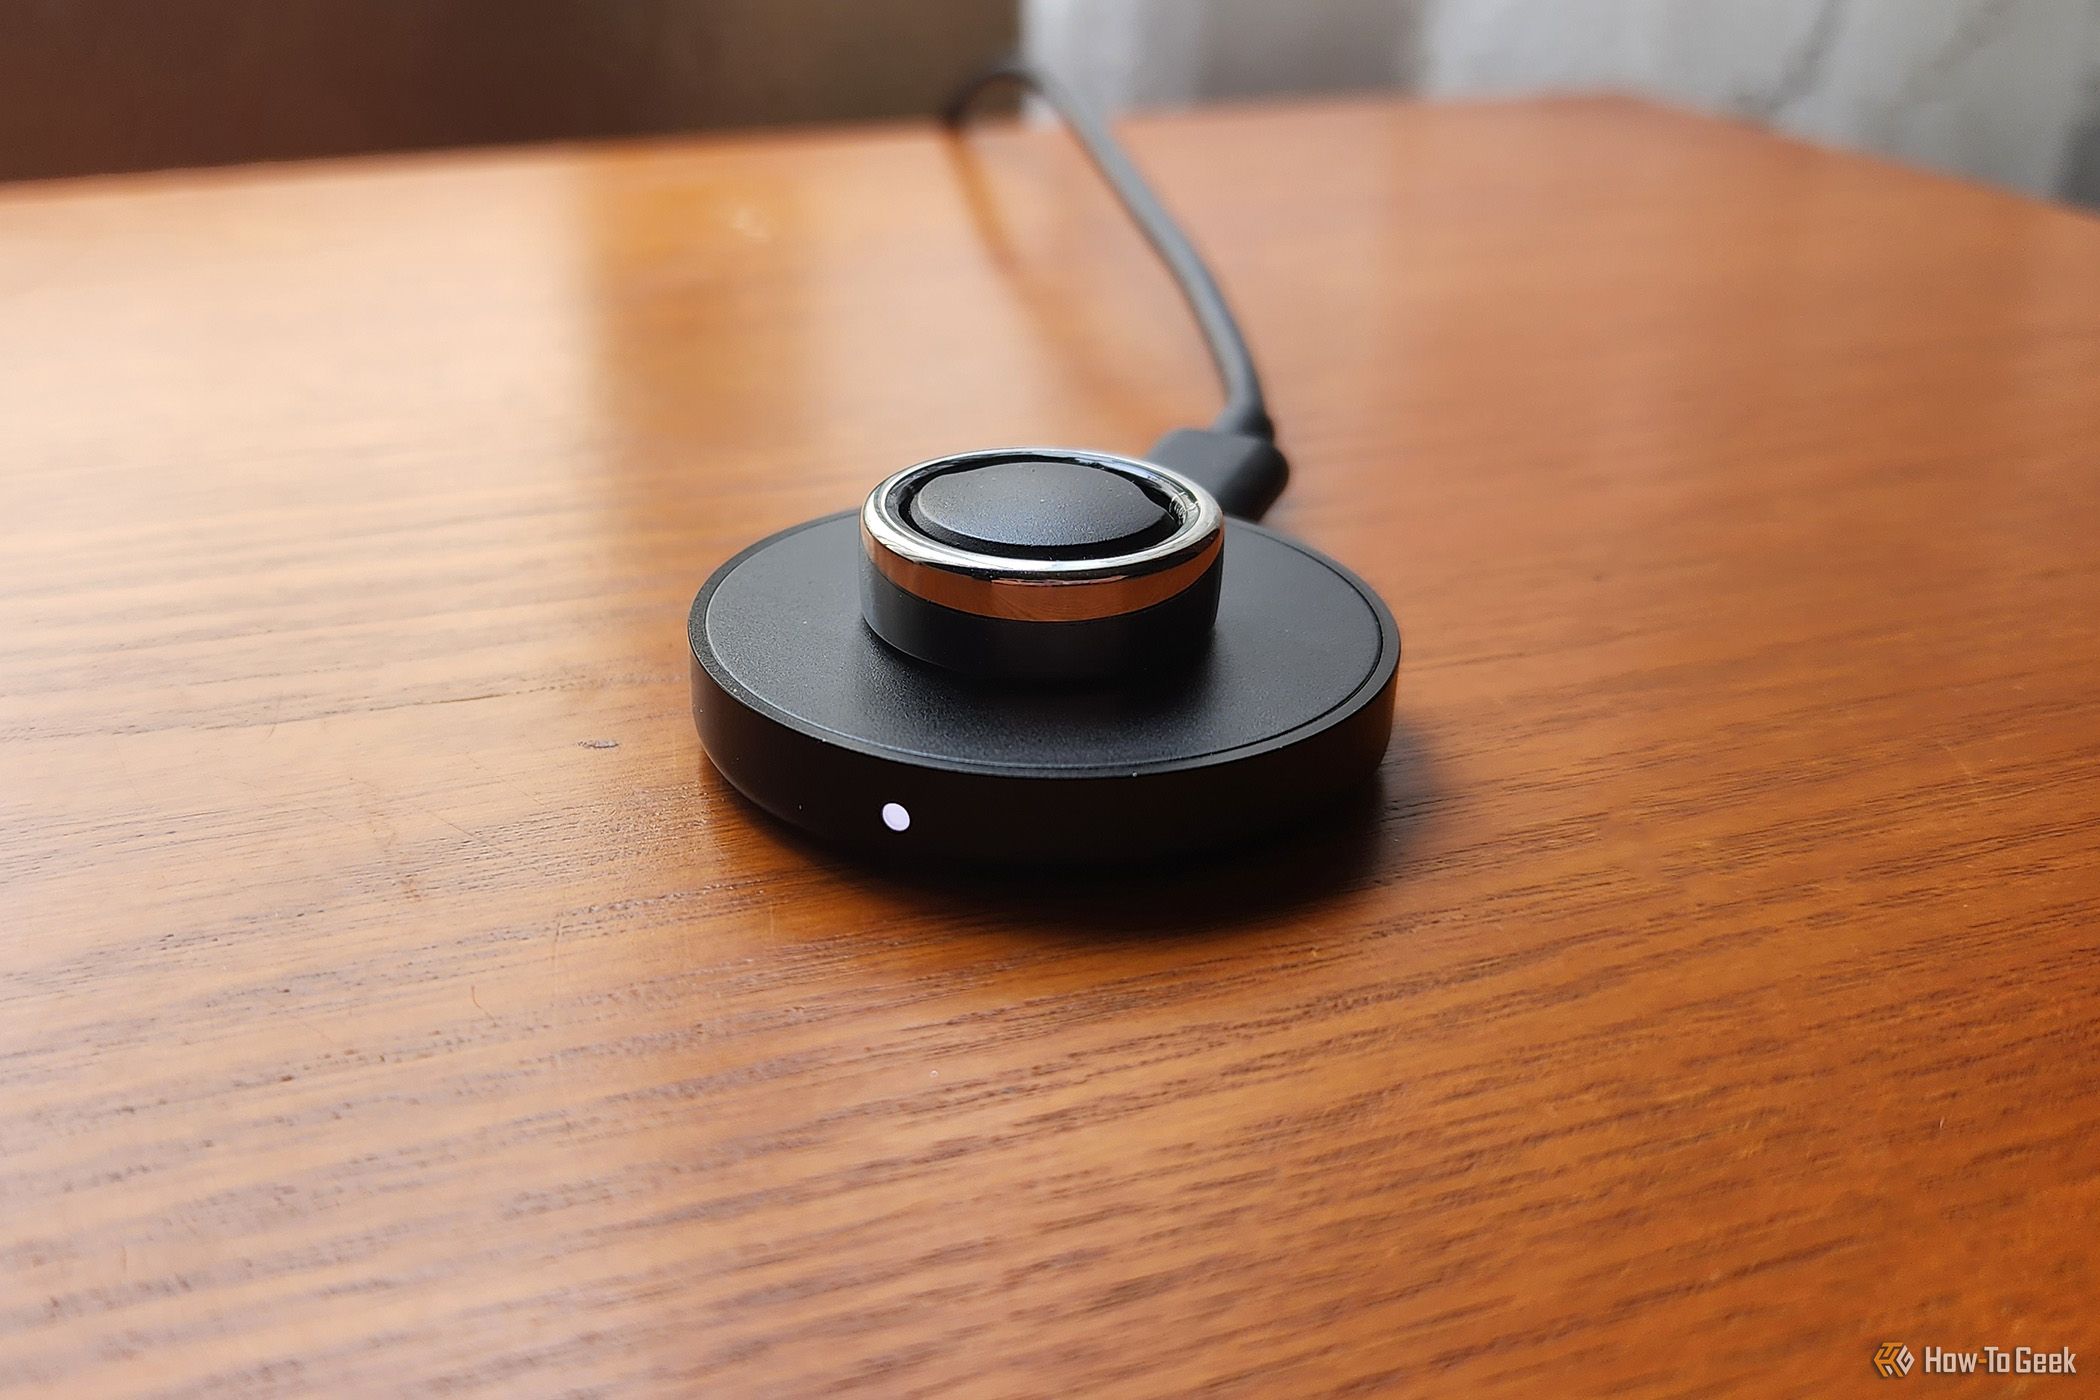 The 3rd Generation Oura Ring charging on its charger.